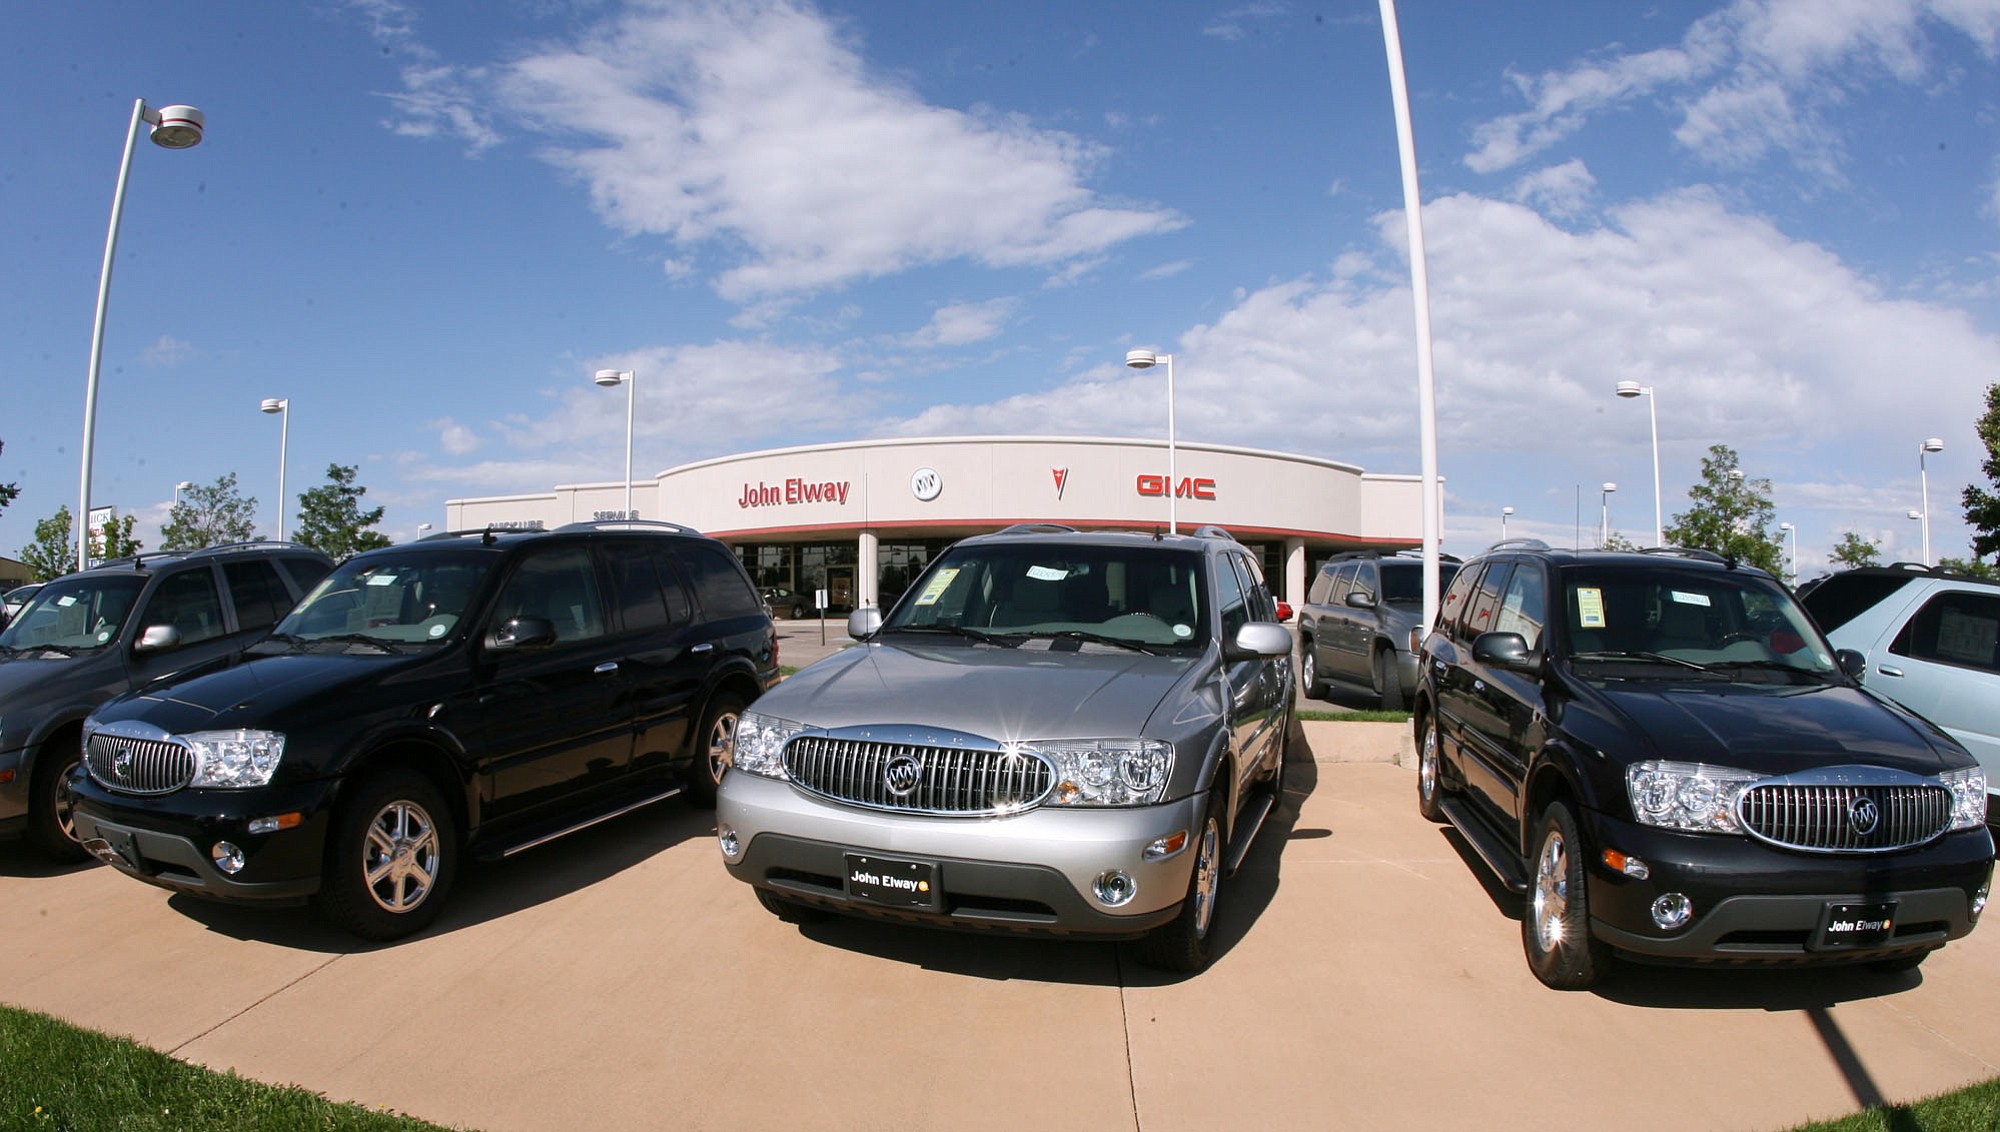 A trio of unsold 2006 Buick Rainier sports utility vehicles sits in front of a Buick dealership in the southeast Denver suburb of Lone Tree, Colo.